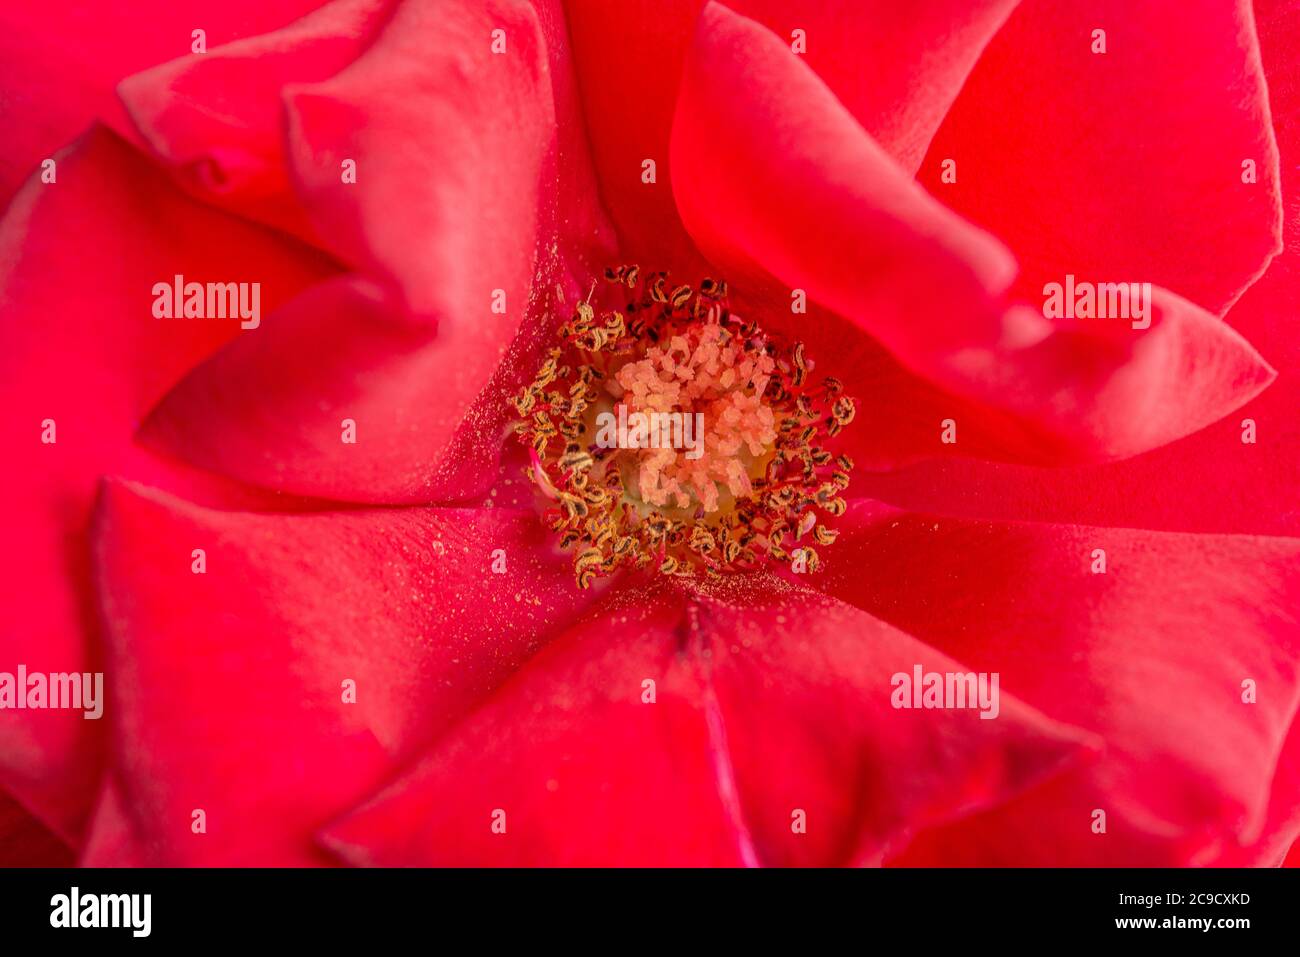 An extreme close-up or macro shot with shallow depth of field and very selective focus of a red rose flower petals in full bloom. Stock Photo